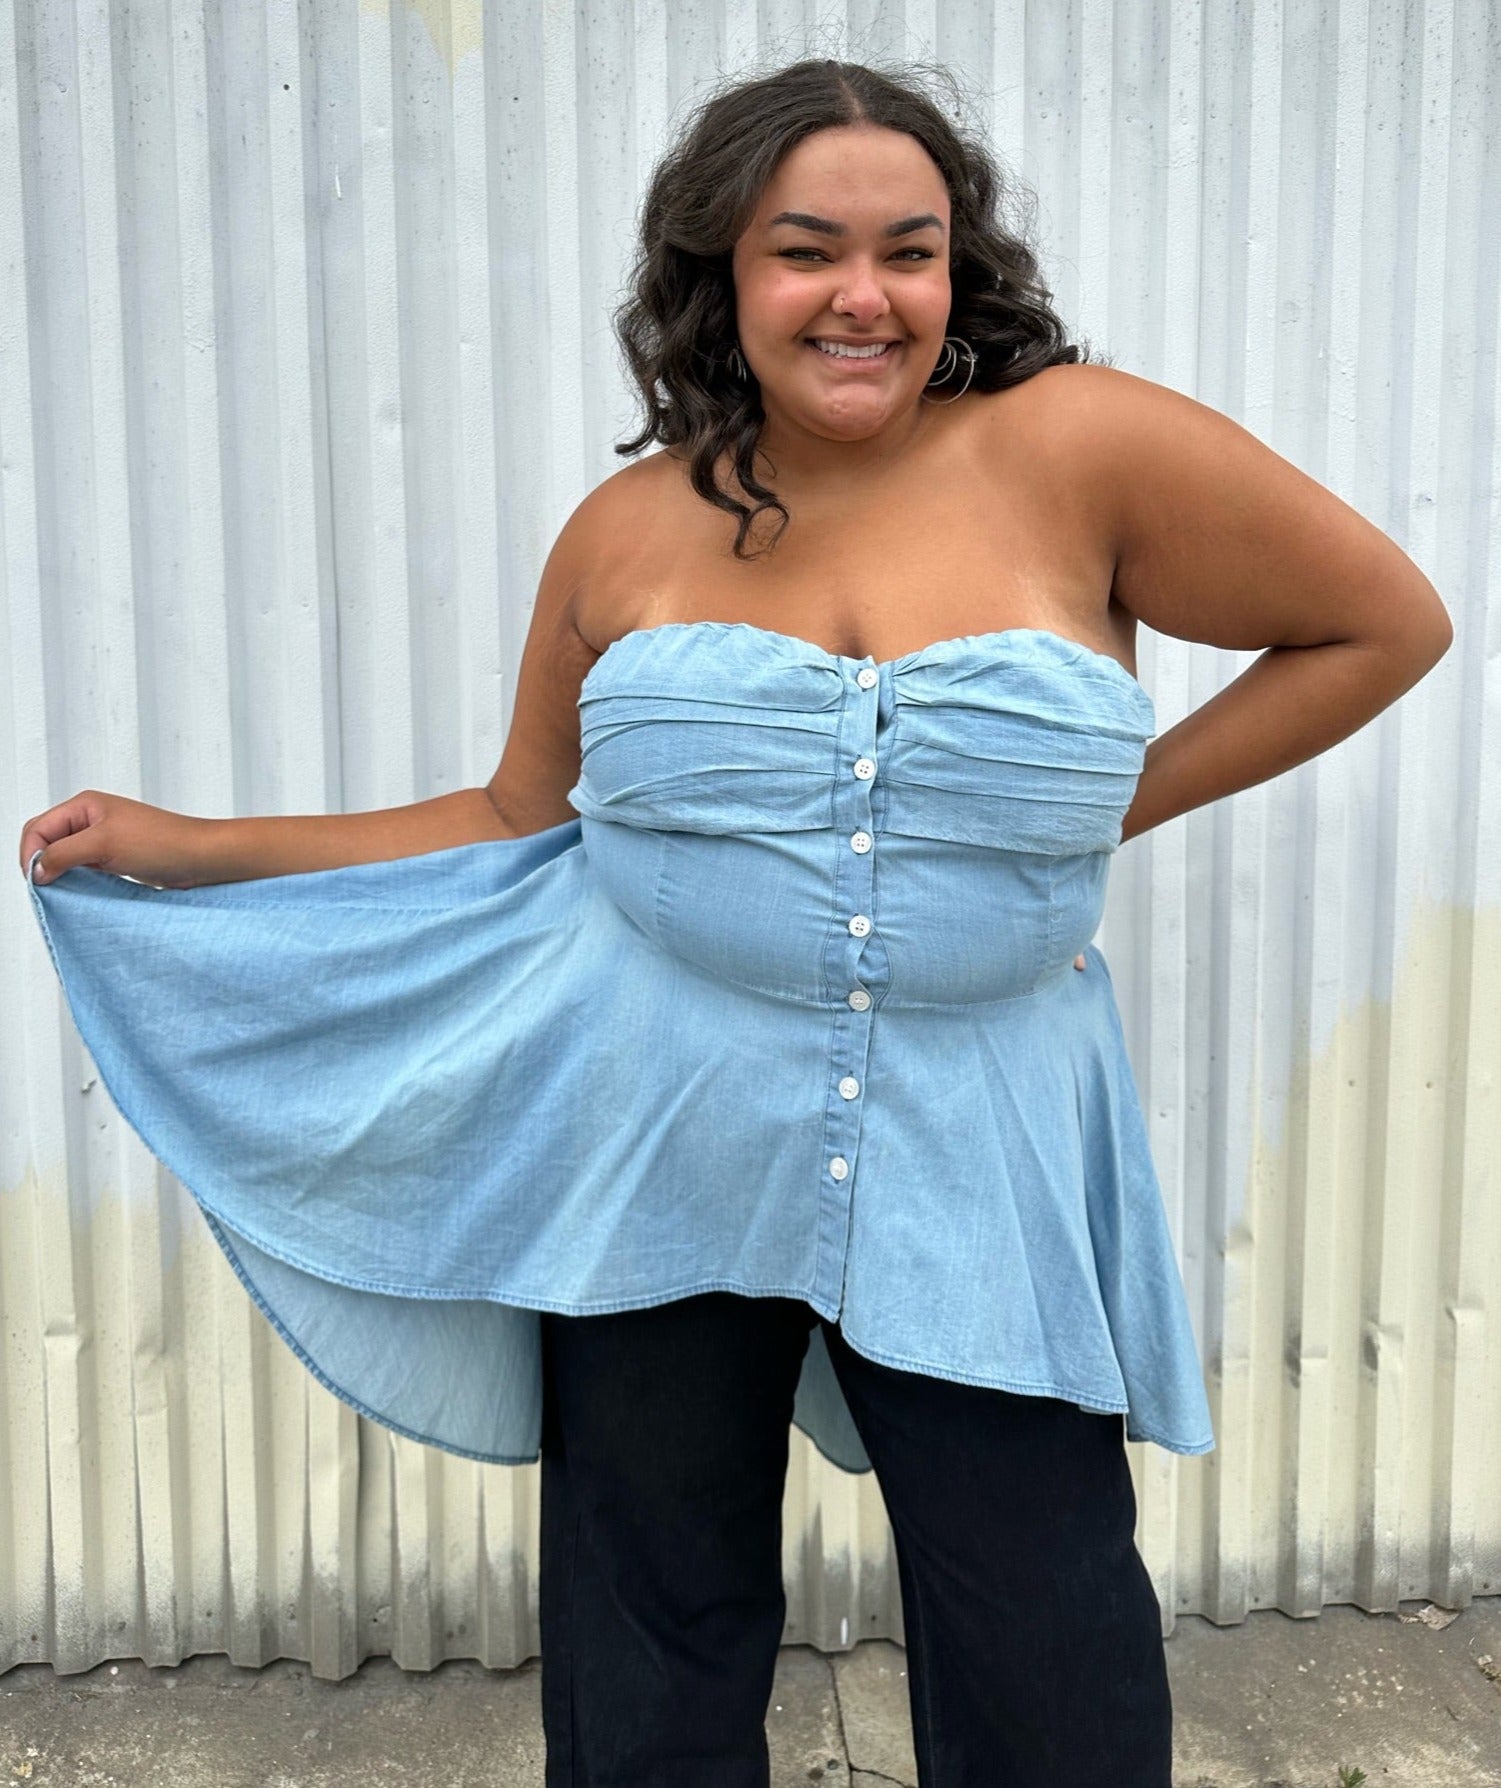 Fashion to Figure Chambray Strapless Button-Up High-Low Blouse